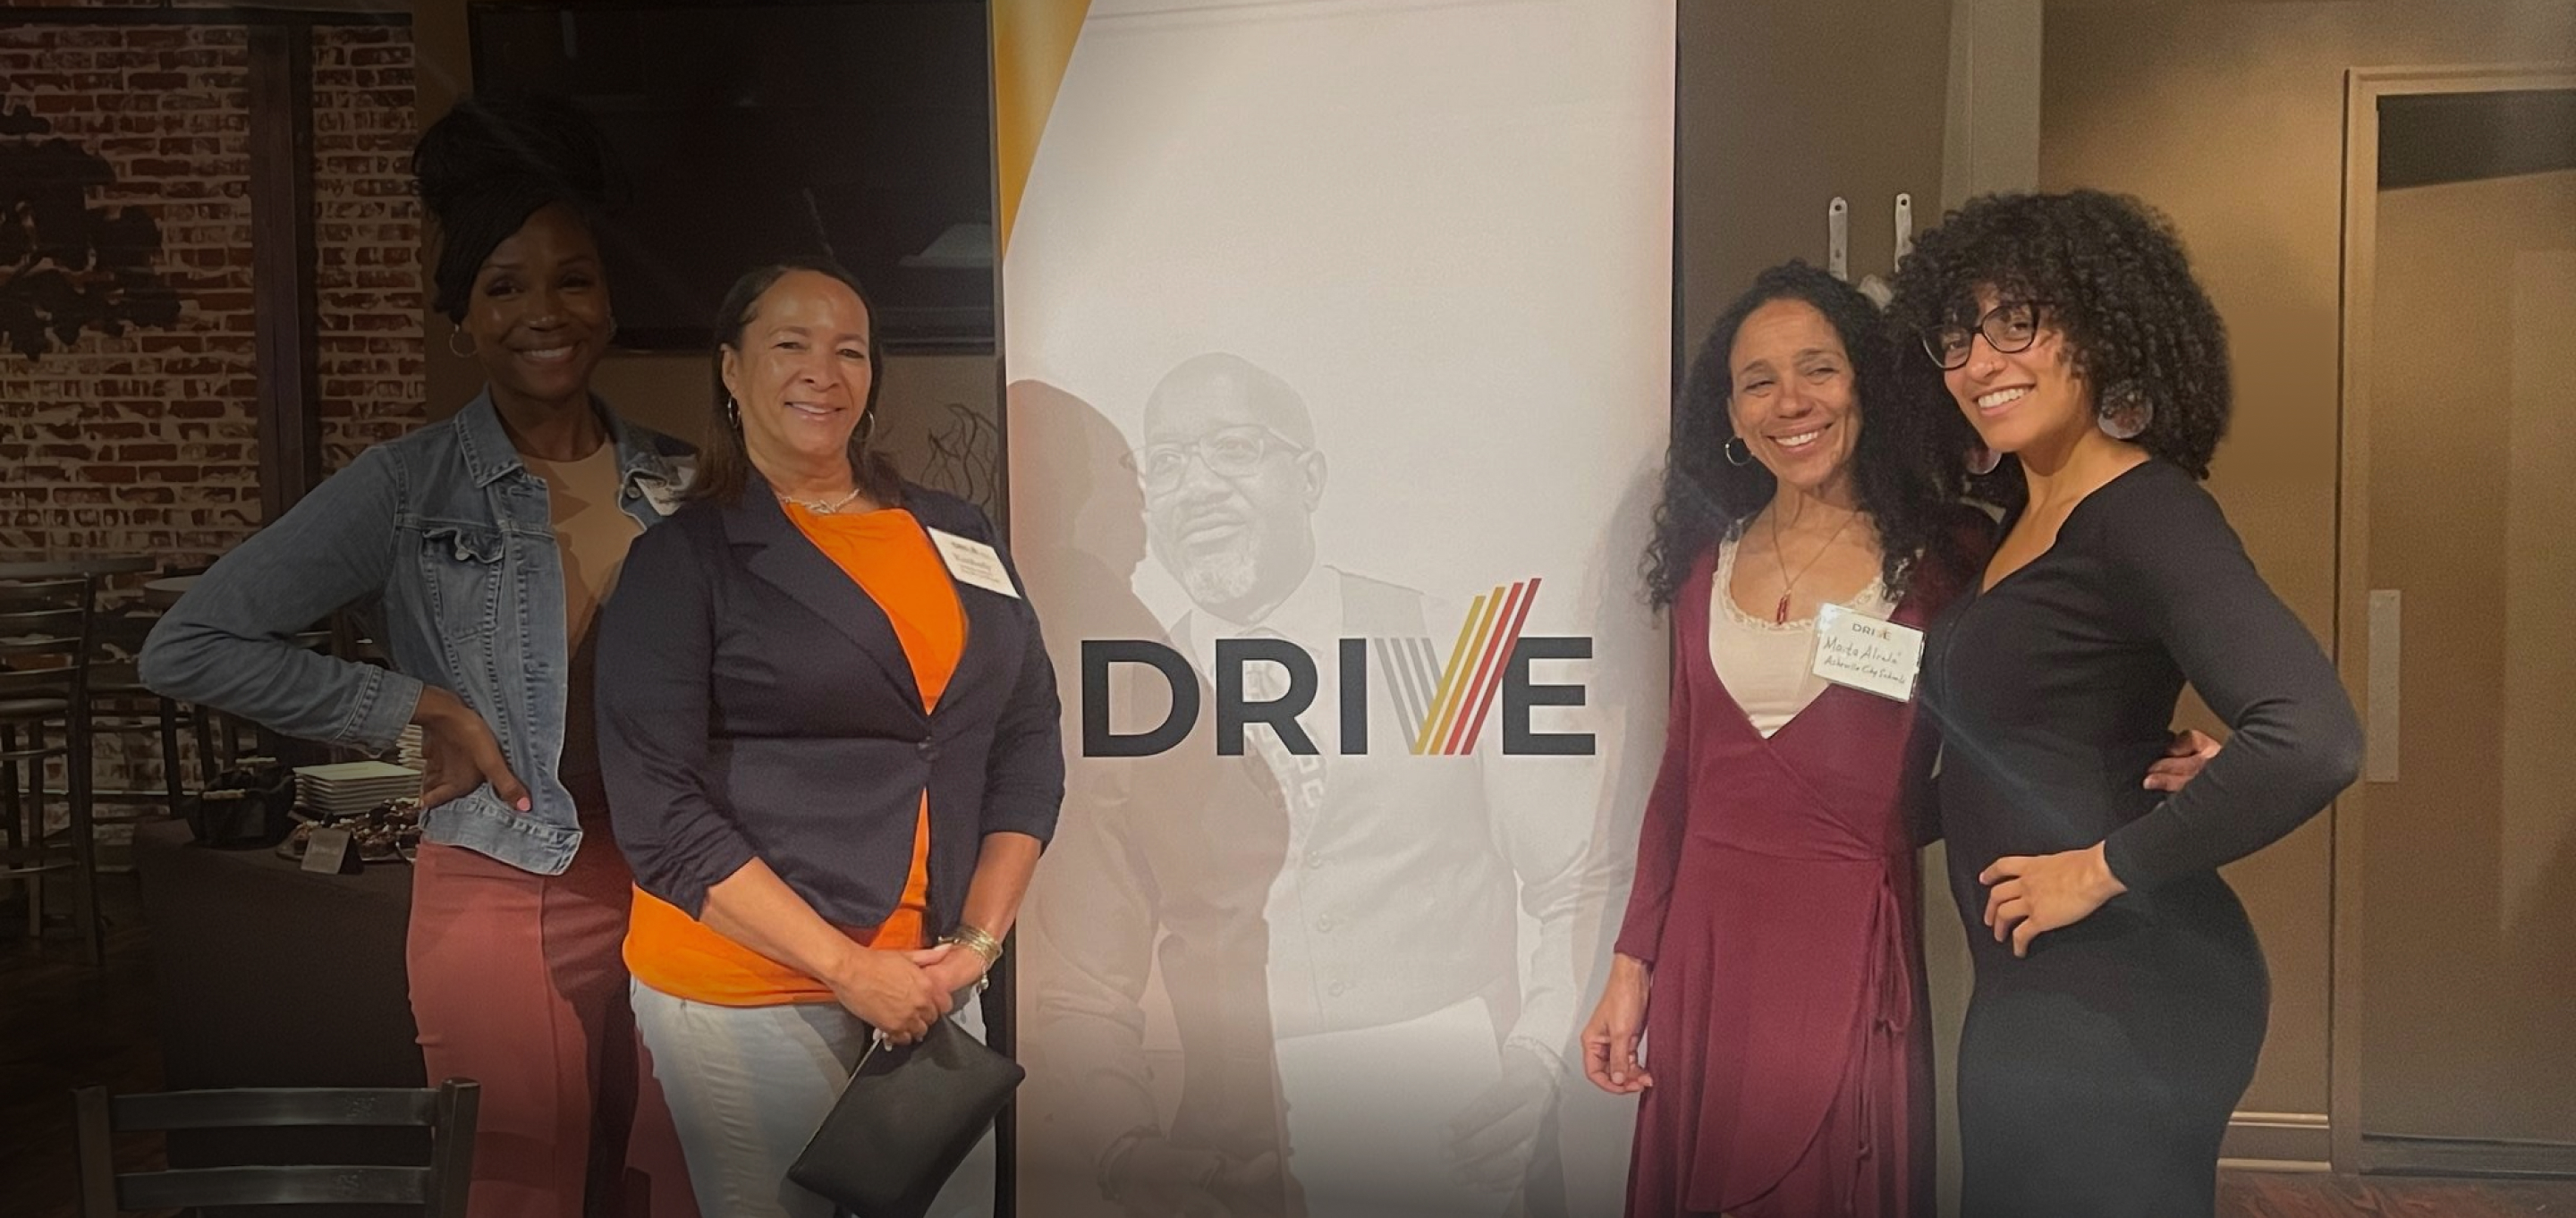 Women posing next to graphic poster with Drive logo.